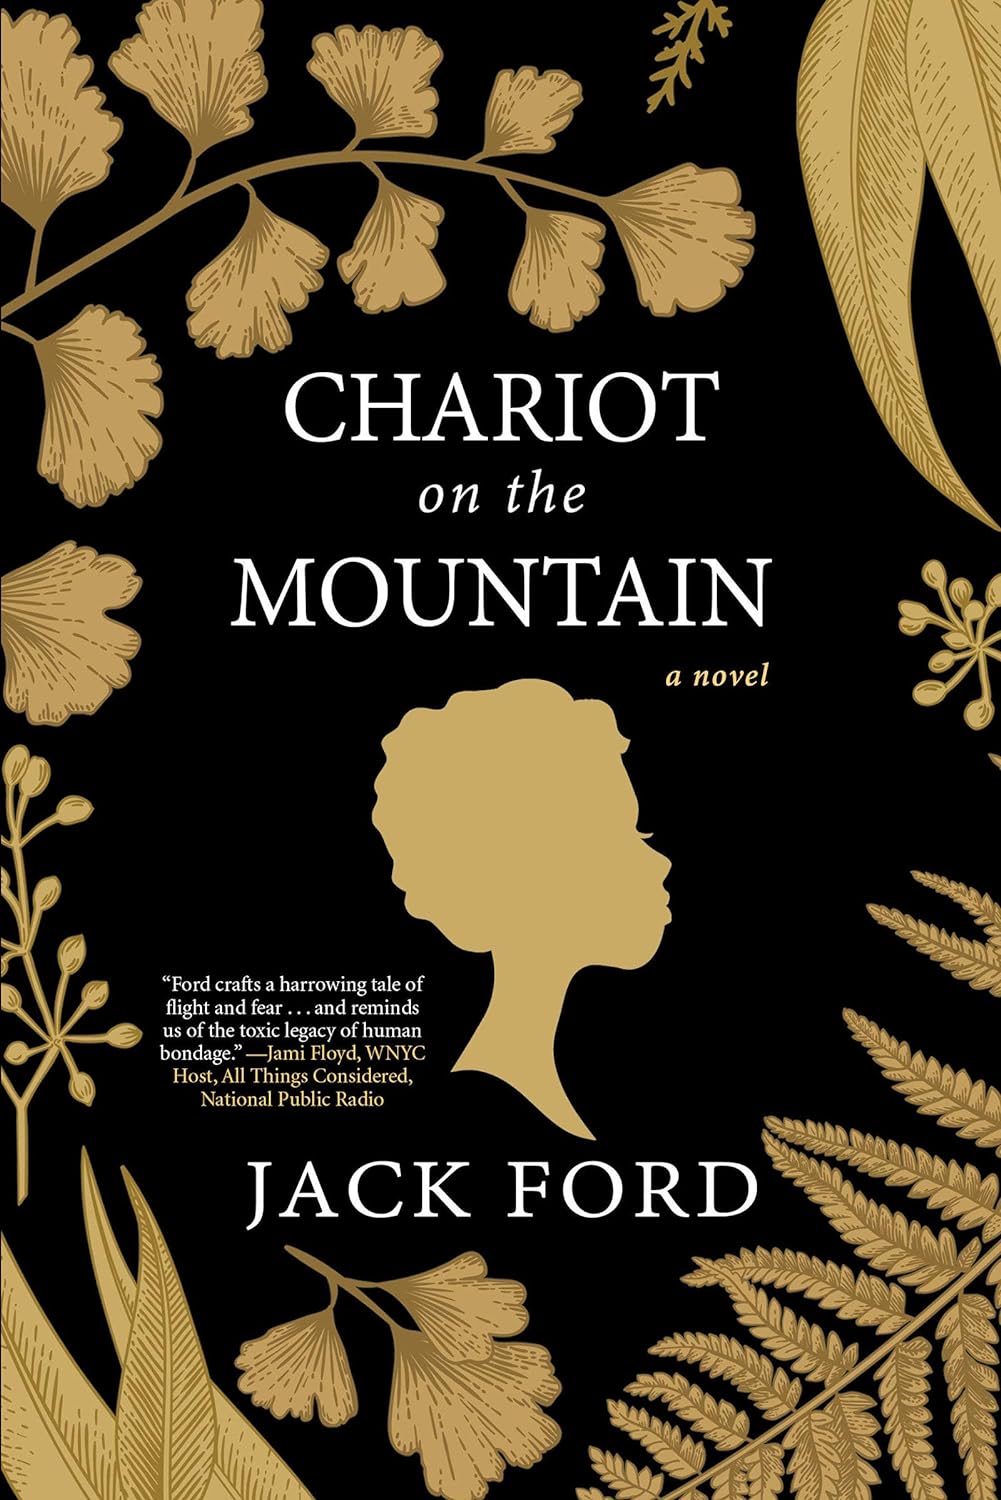 Chariot on the Mountain, by Jack Ford, will be discussed on December 21st